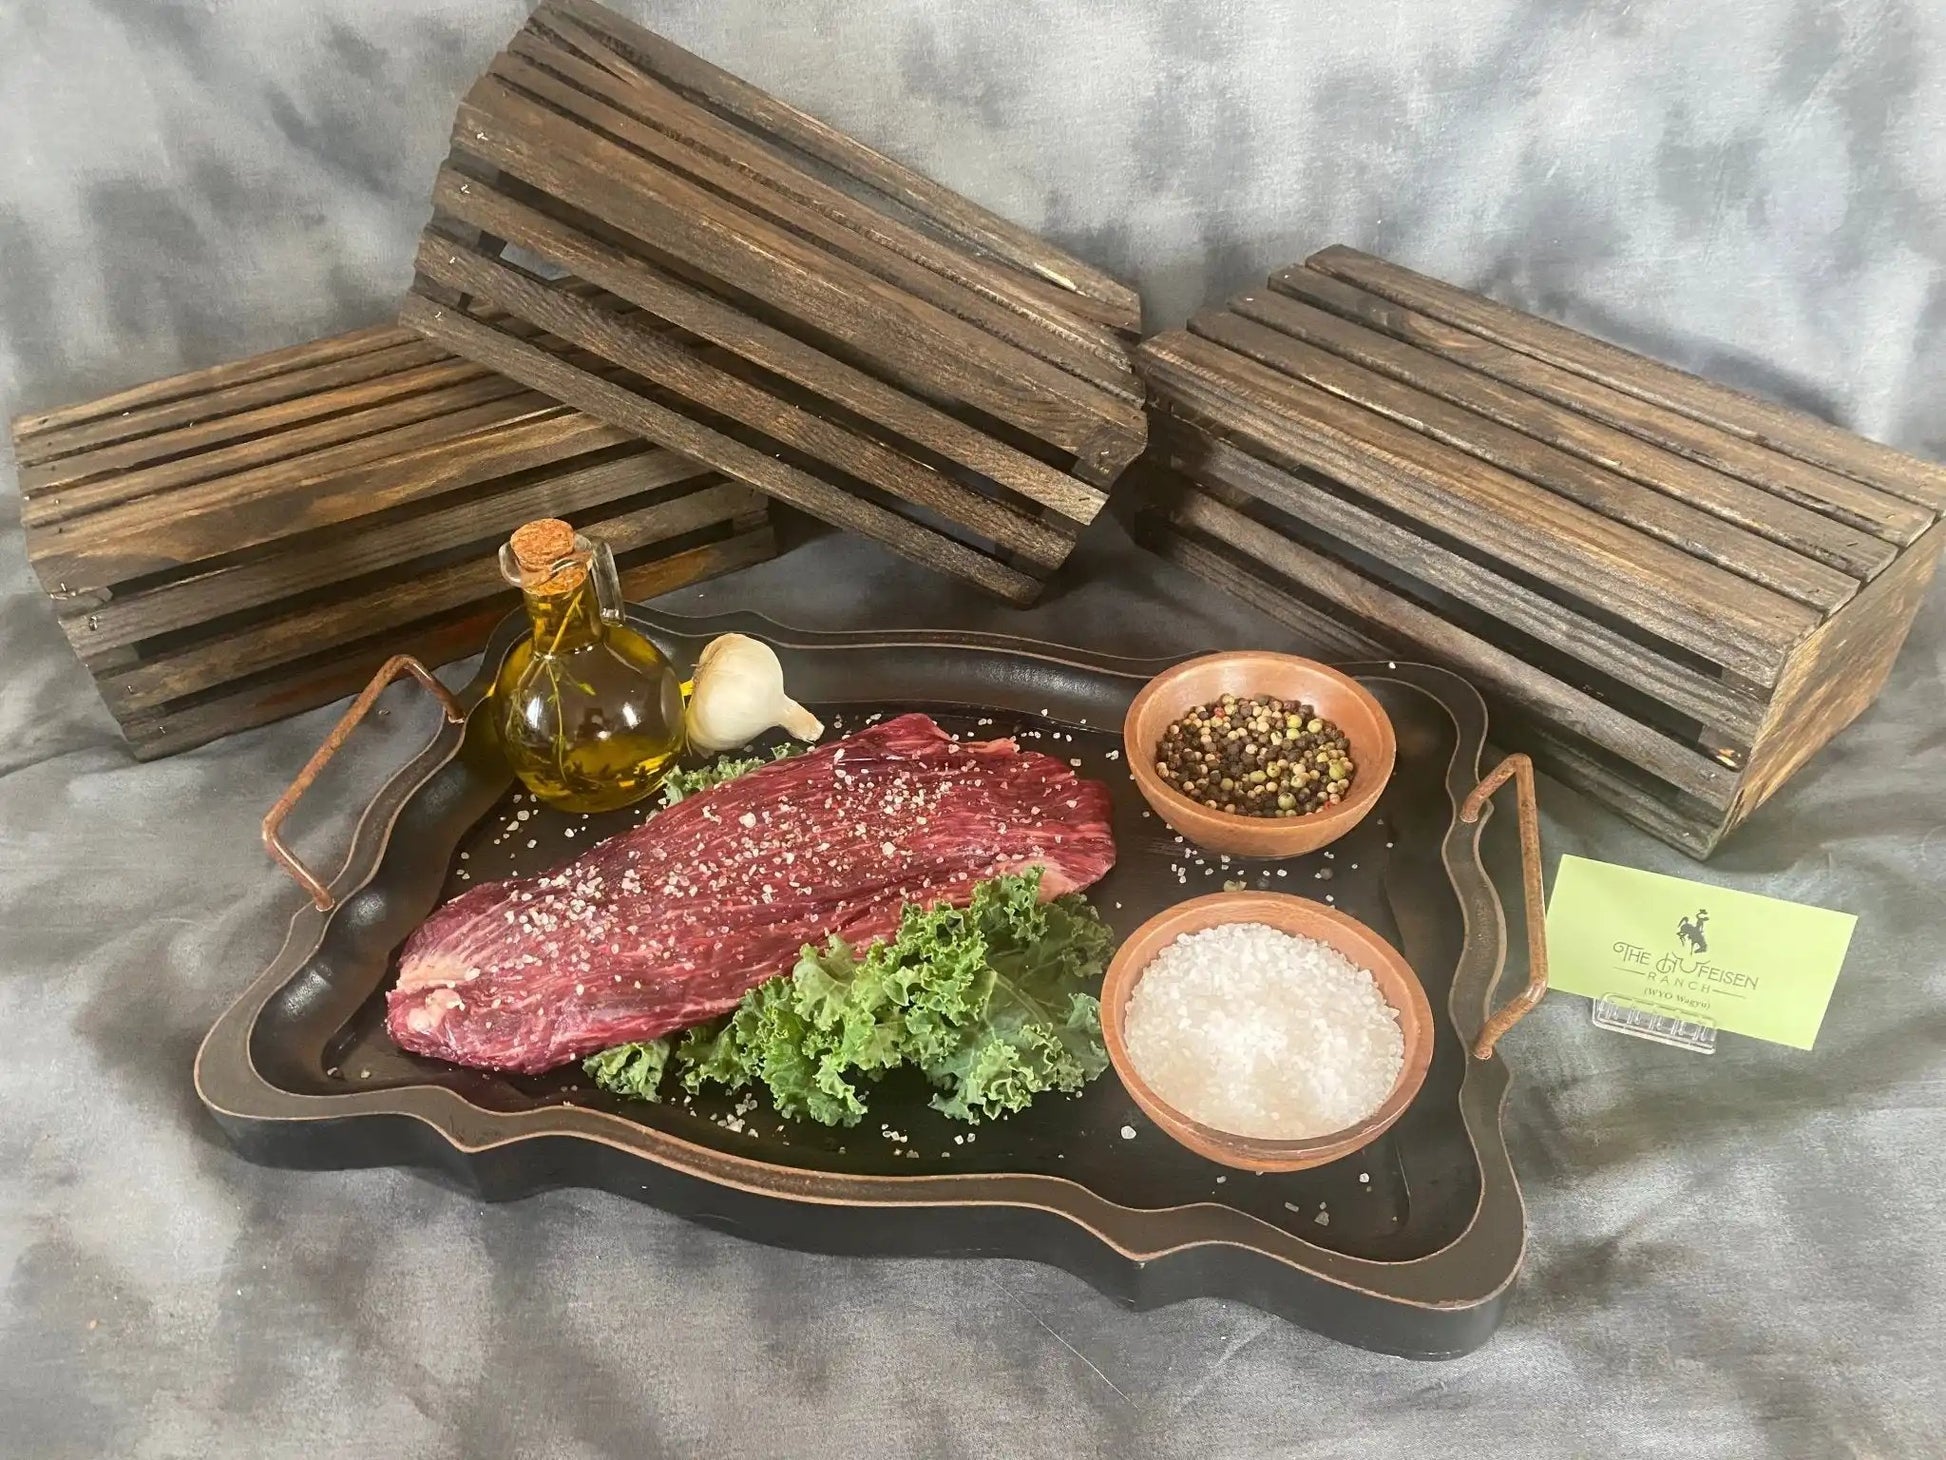 100% All-Natural Grass-Fed Black Angus Flank Steak - The Hufeisen-Ranch (WYO Wagyu)